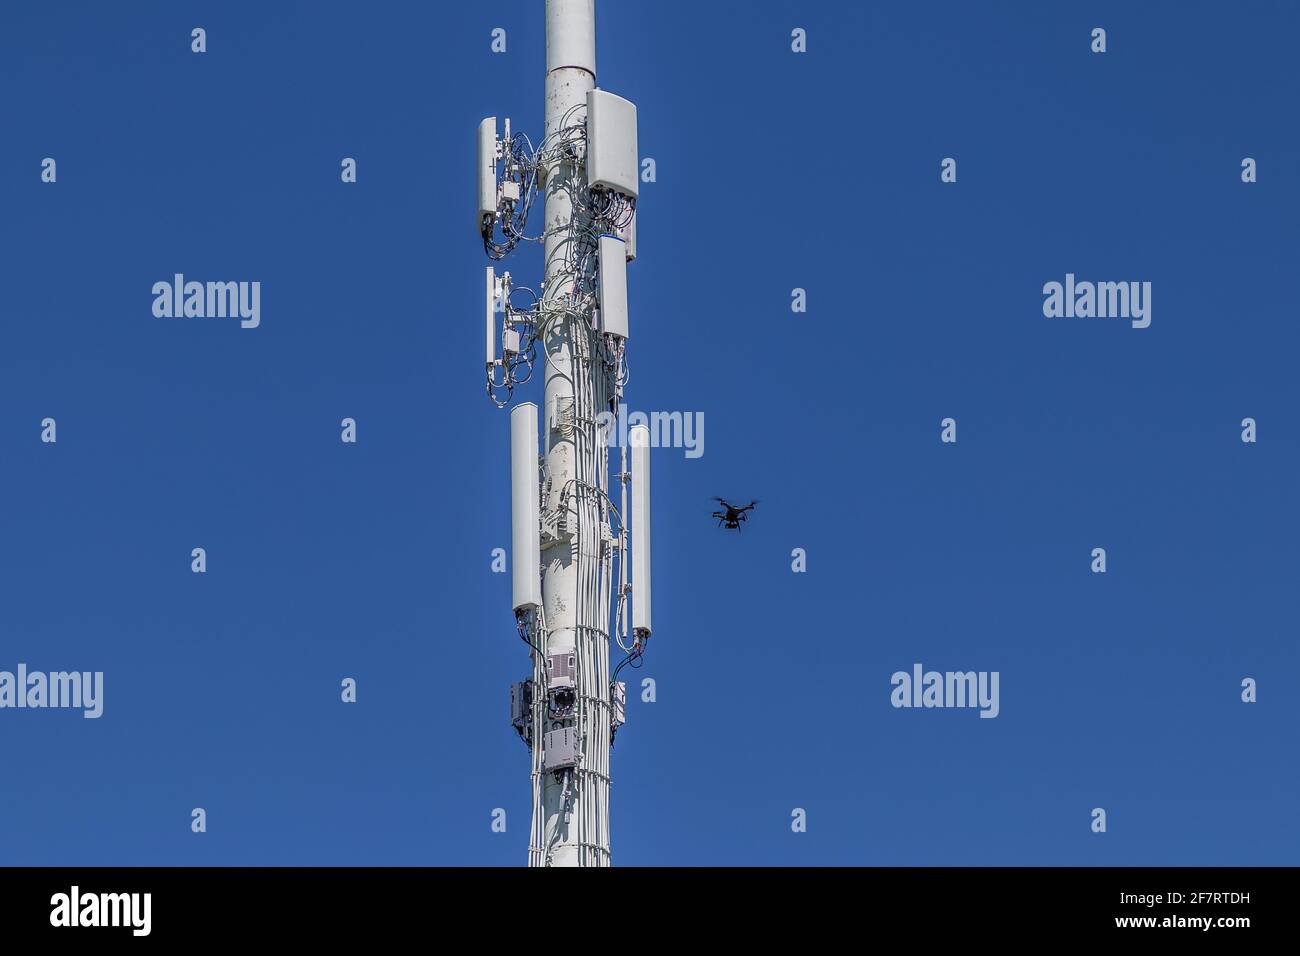 Drone Inspecting lower right of a cell tower Stock Photo